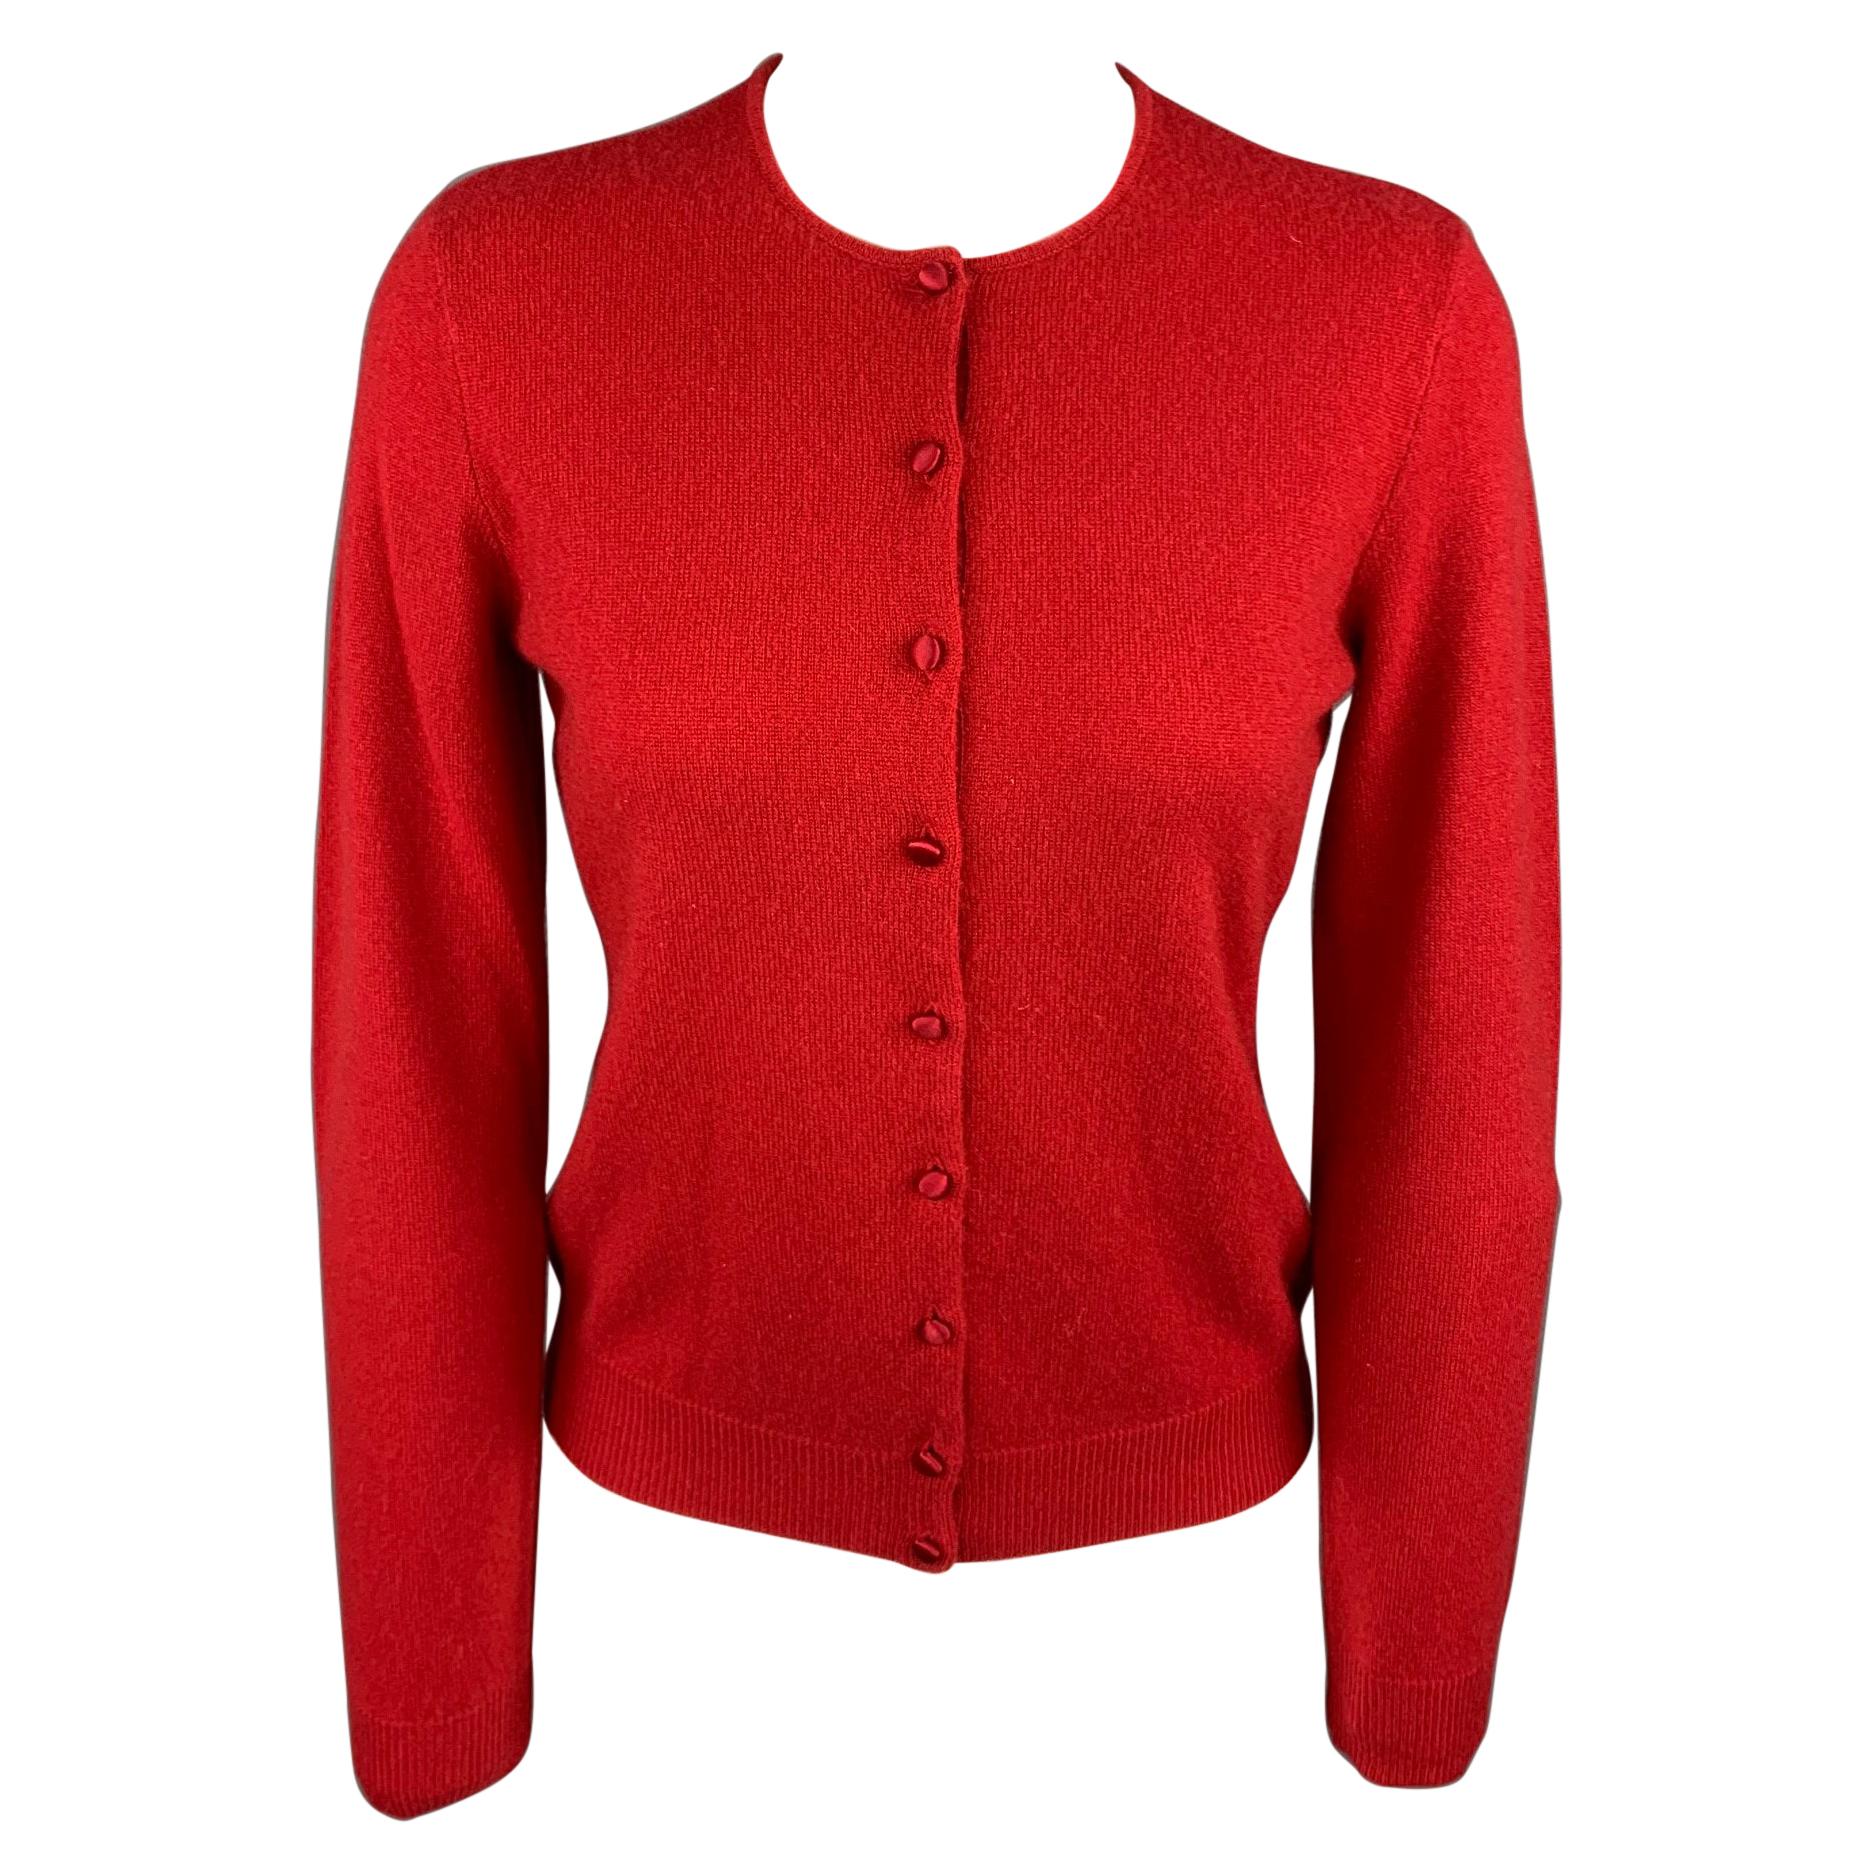 RALPH LAUREN Black Label Size M Red Knitted Cashmere Cardigan